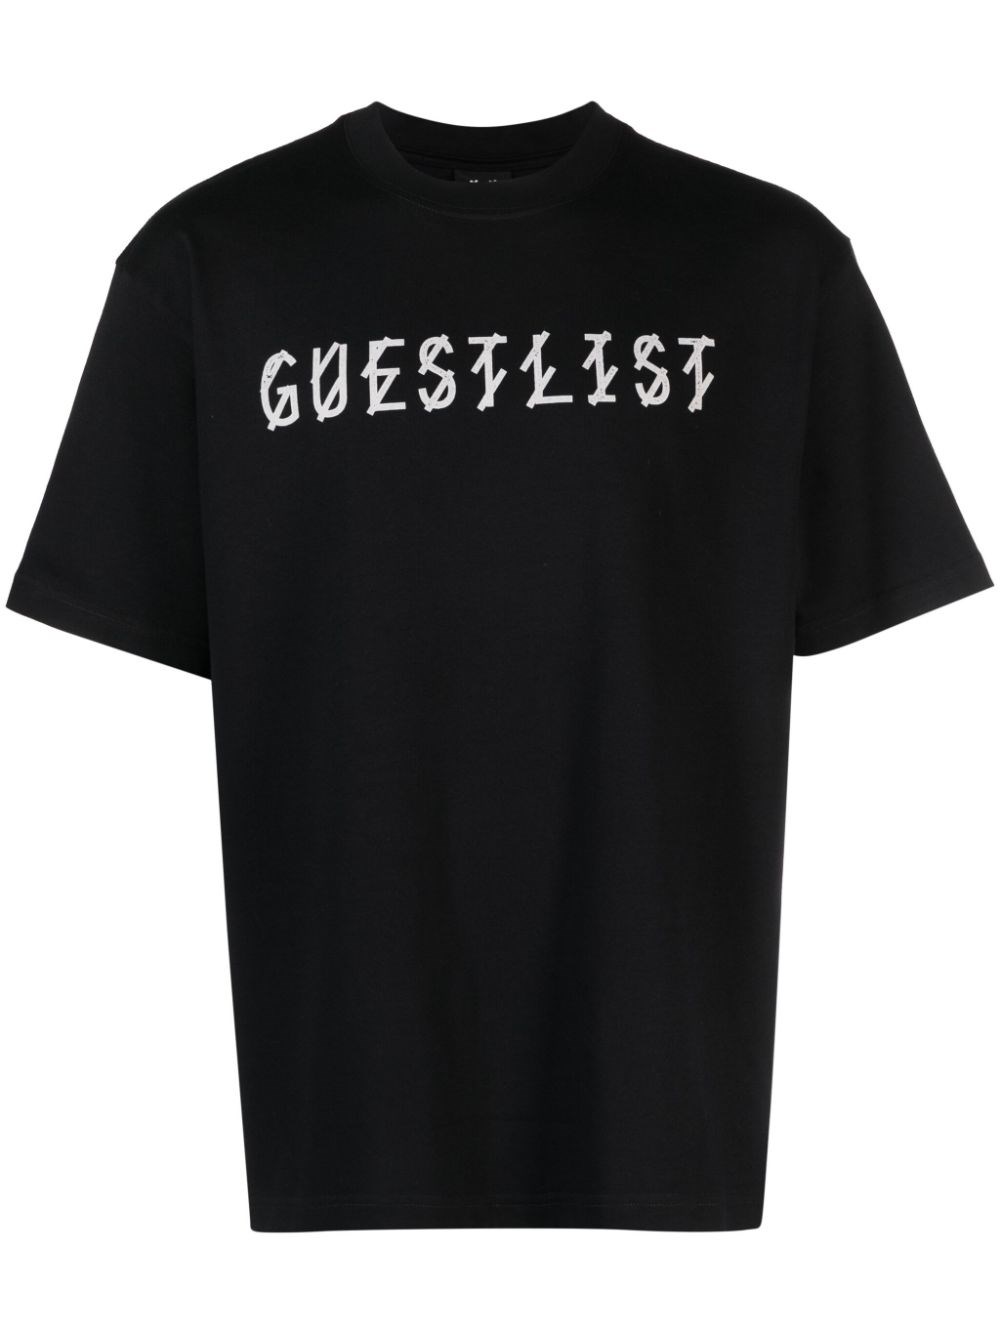 44 Label Group Cotton T-shirt In Black  